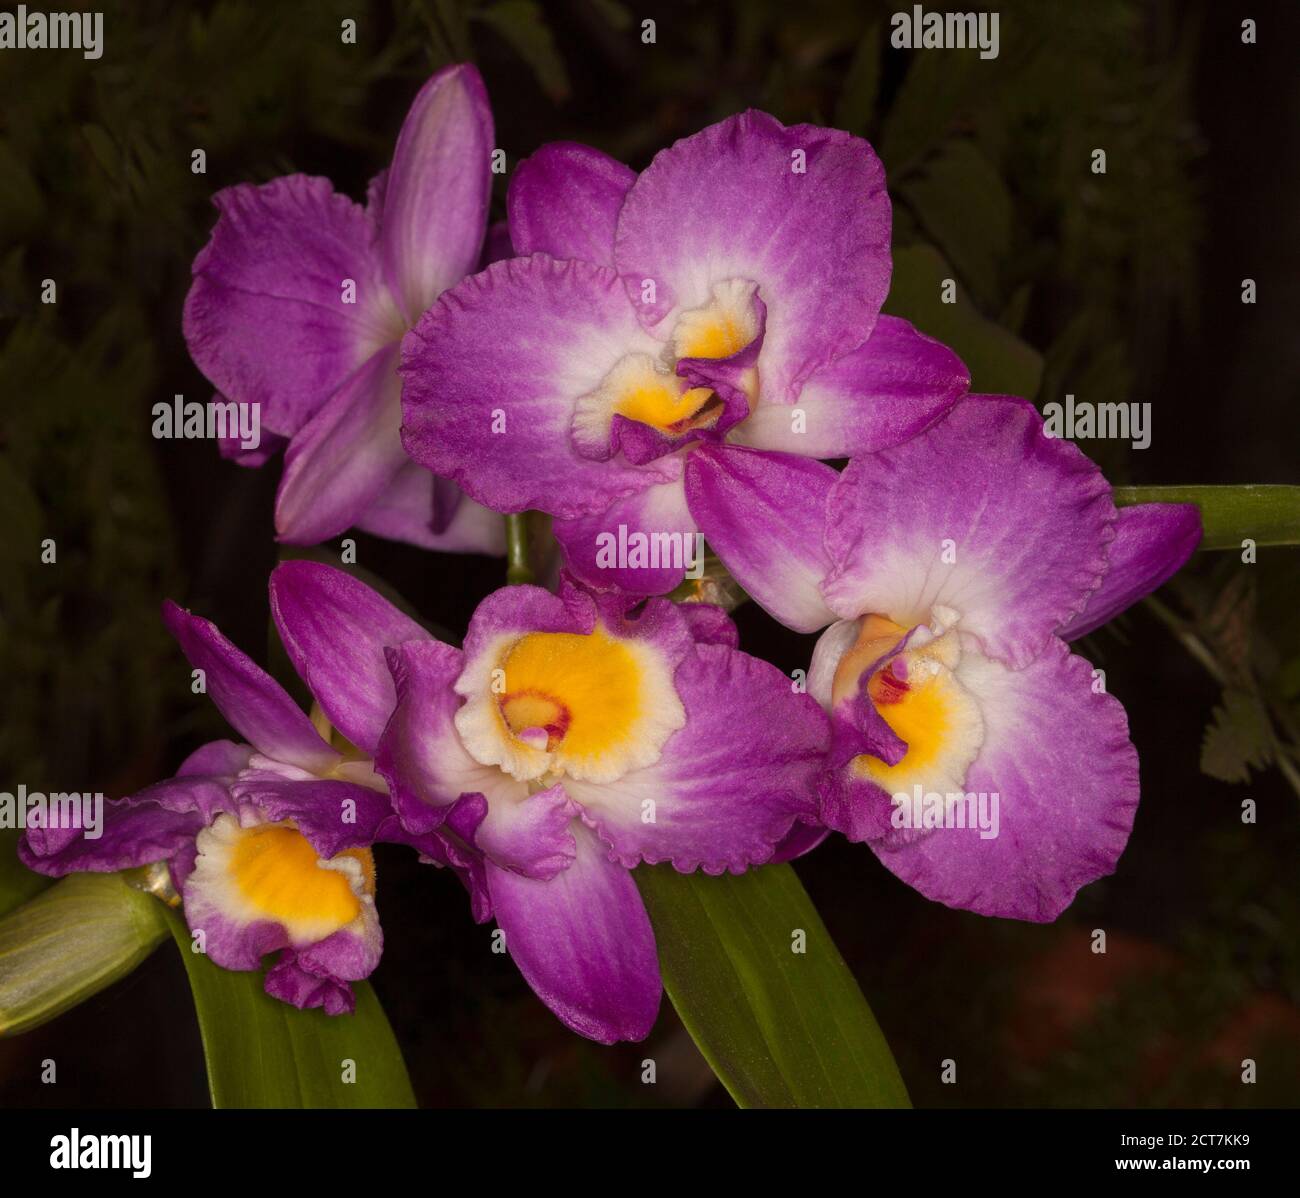 Cluster of stunning vivid deep pink, white and yellow flowers of orchid Dendrobium Elegant Smile 'Red Crest' on dark background Stock Photo